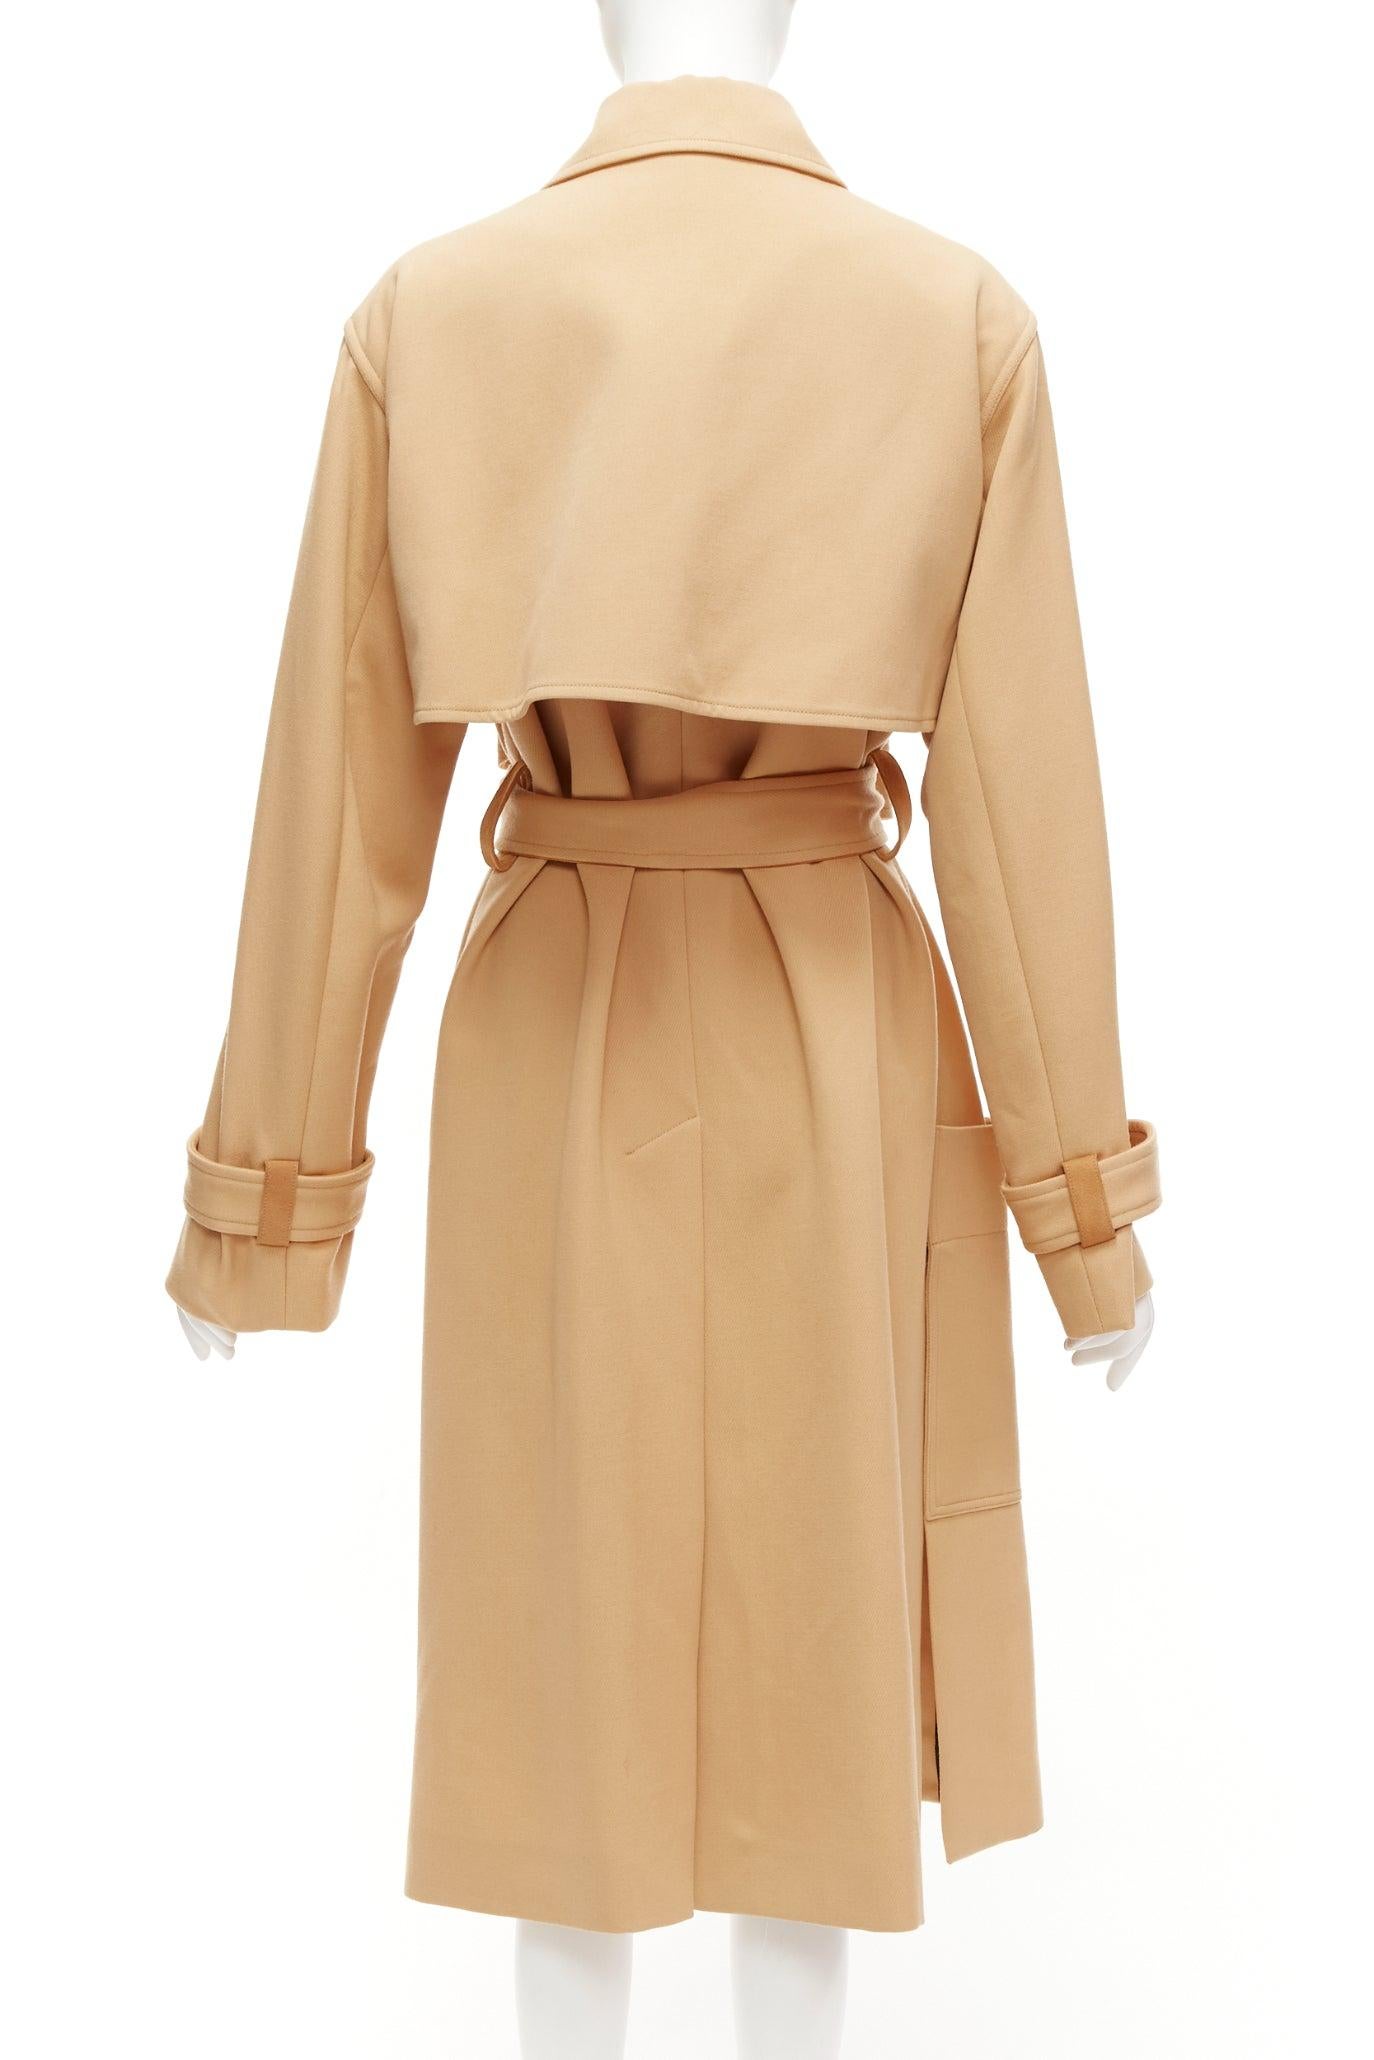 OLD CELINE Phoebe Philo wool goat leather trimmed deconstructed trench coat FR38 For Sale 2